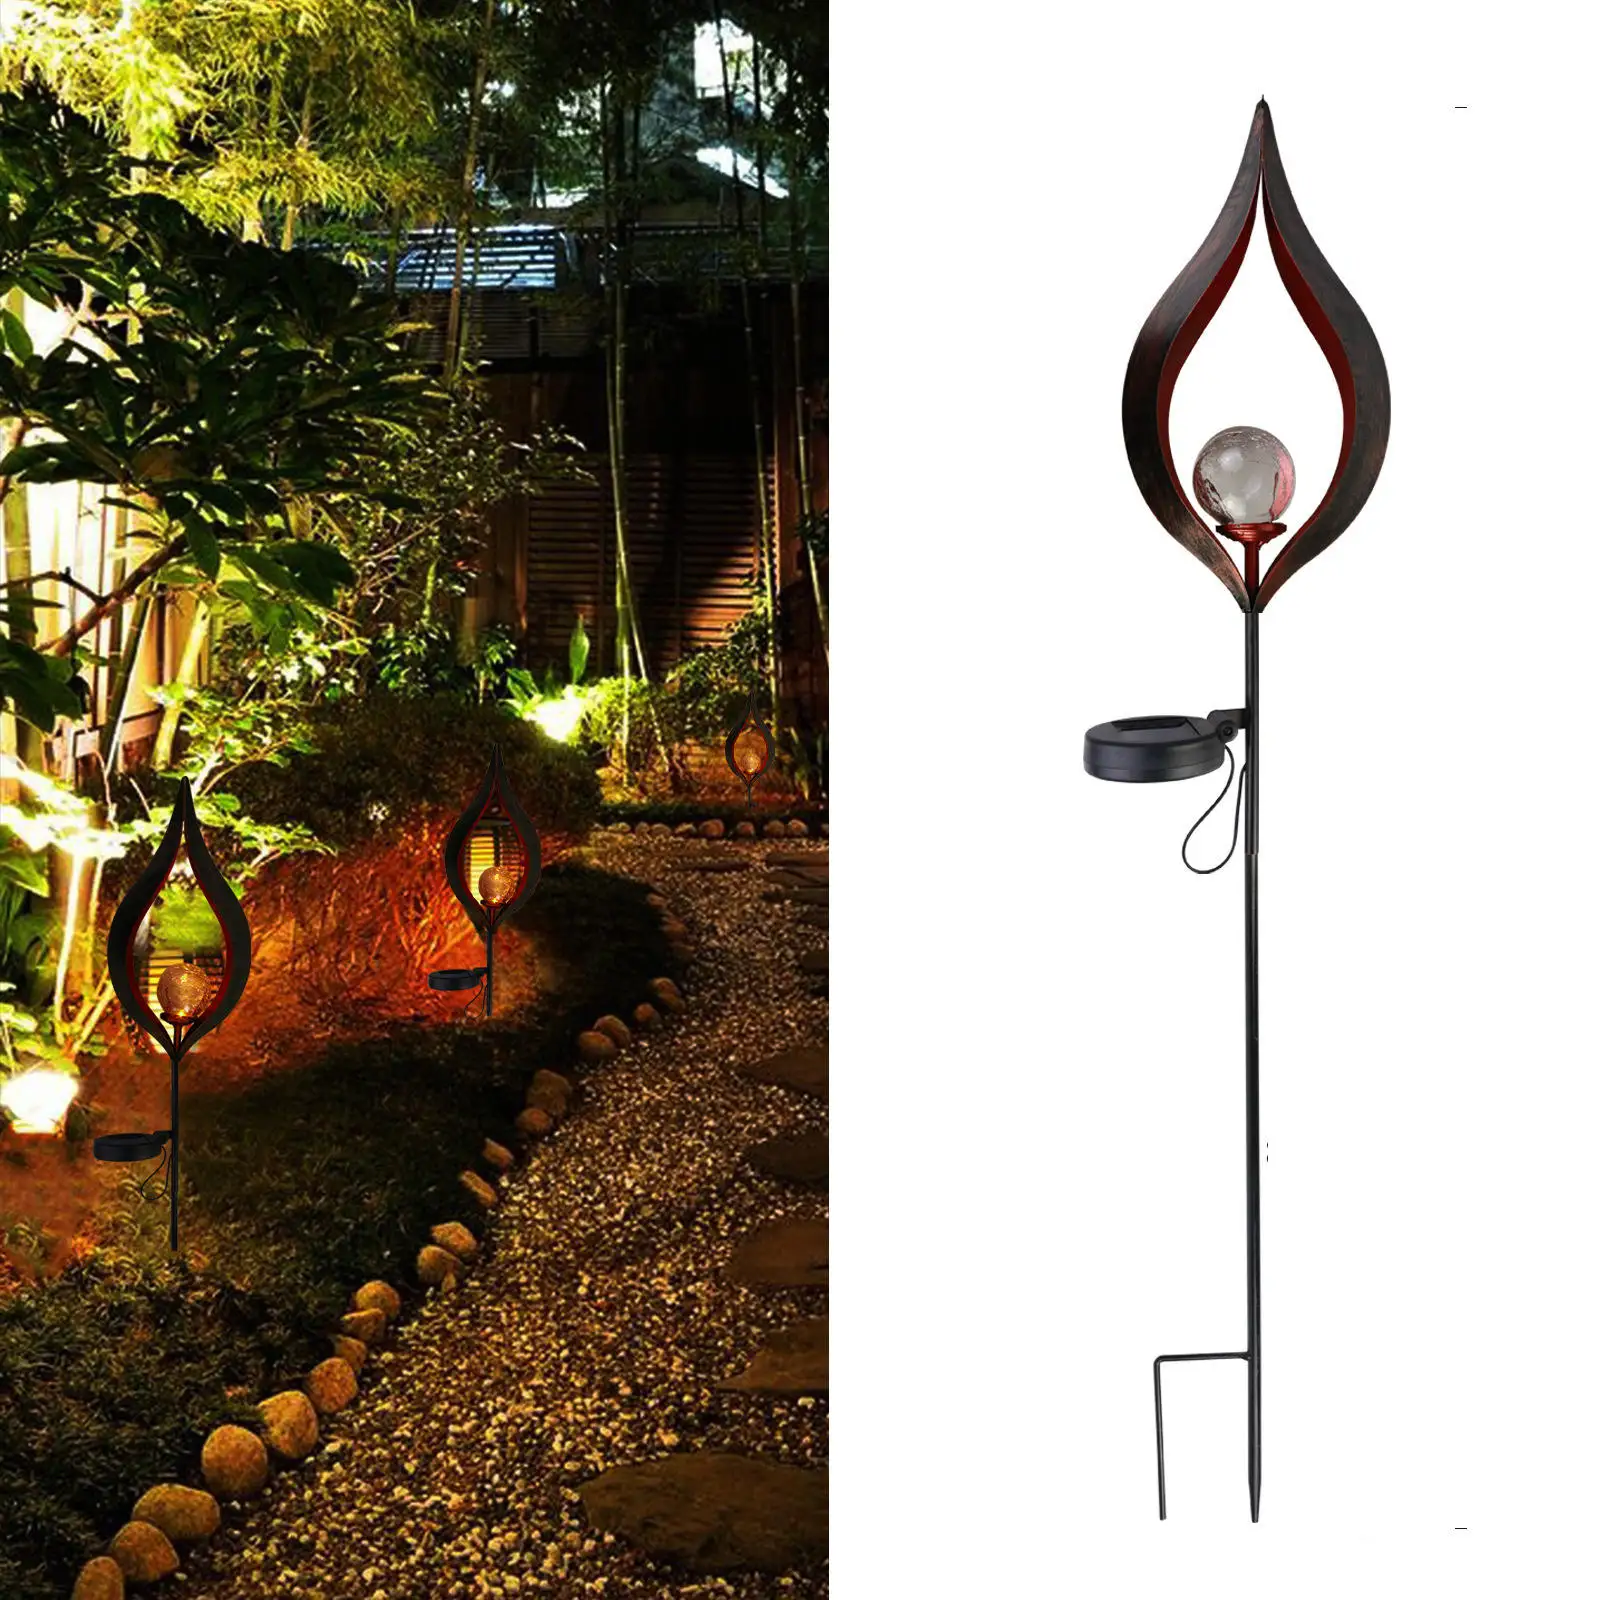 Iron Solar Pathway Lights Super Bright Waterproof Retro Warm White Lighting LED Lamp for Deck Lawn Decorative Landscape Outdoor